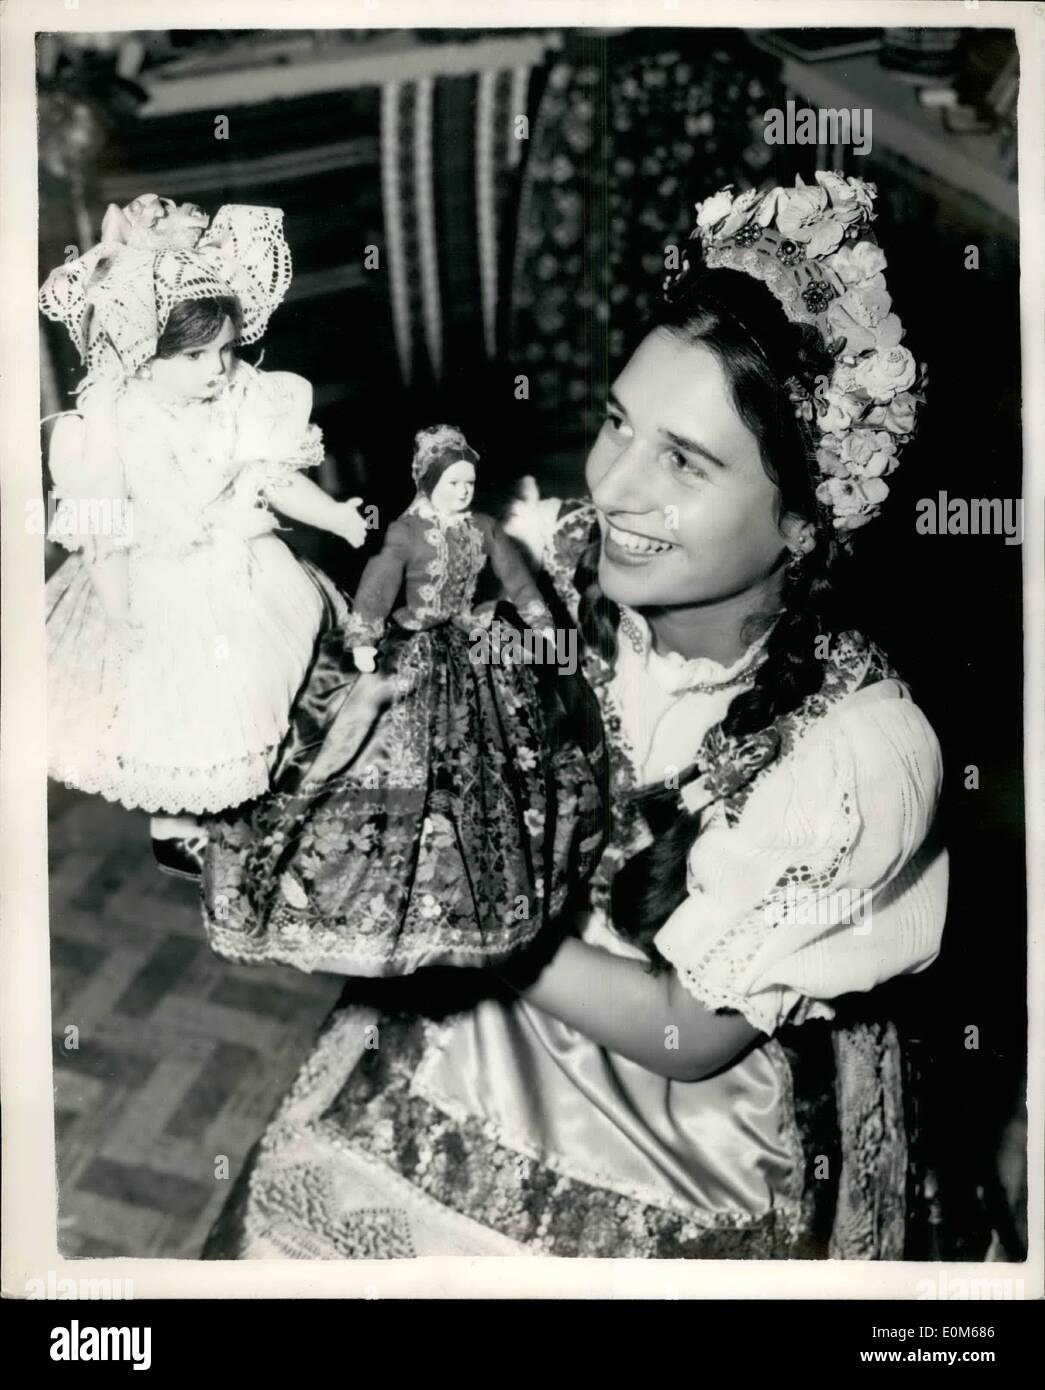 Sep. 09, 1953 - International Handicrafts Exhibition: The first International Handicrafts Exhibition ever held in Britain, opens tomorrow at Empire Hall, Olympia. A preview was held this afternoon. Photo shows Miss Edith Smookler, wearing Hungarian national costume, seen with two doll exhibits of the British Hungarian Friendship Society, on their stand at the exhibition today. Stock Photo